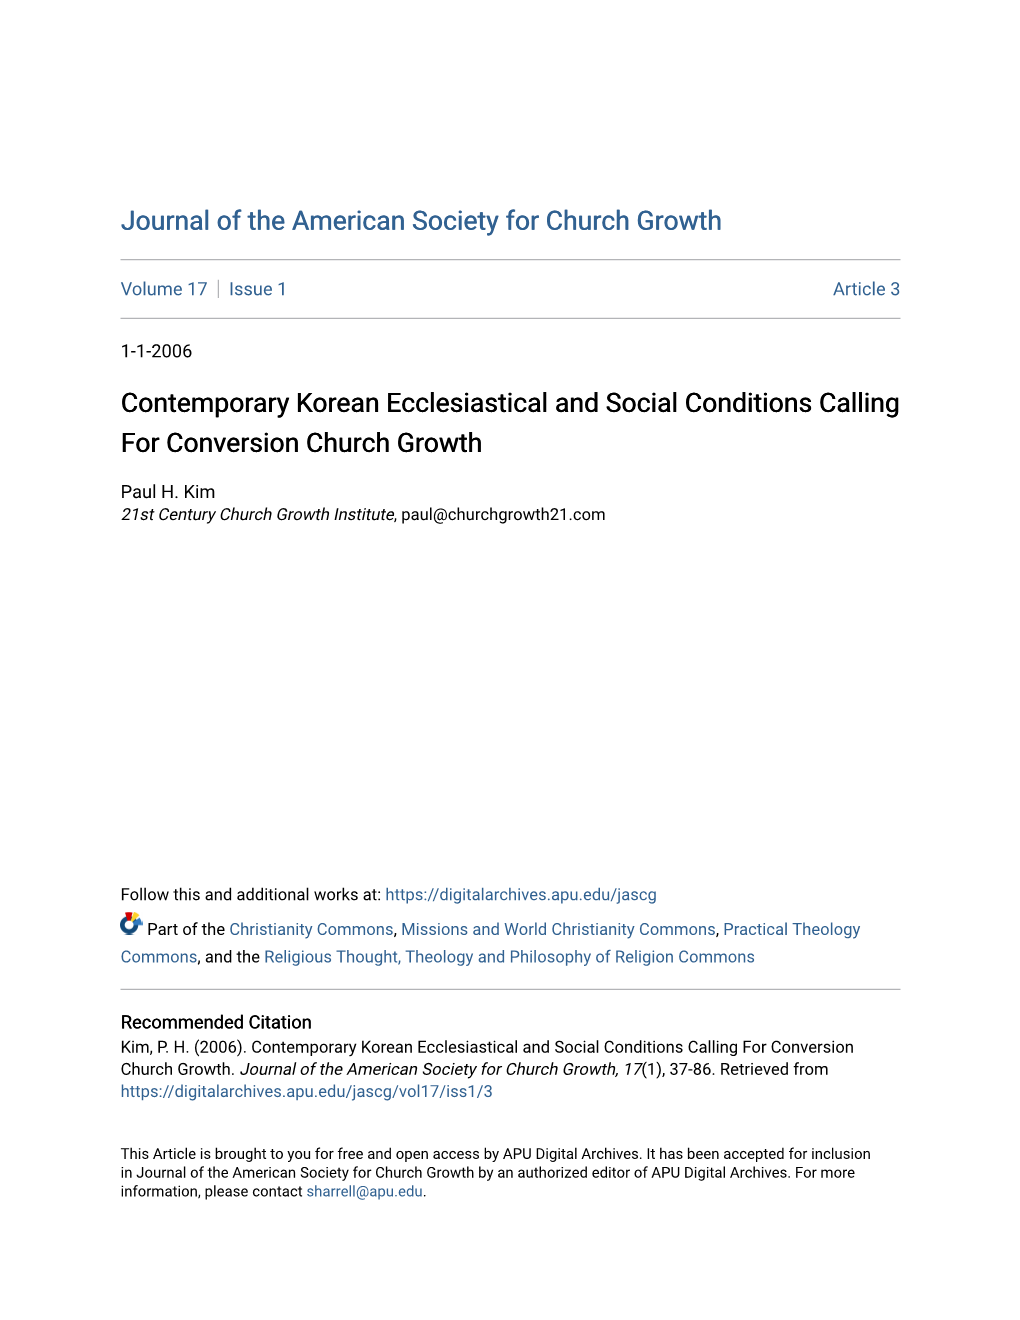 Contemporary Korean Ecclesiastical and Social Conditions Calling for Conversion Church Growth